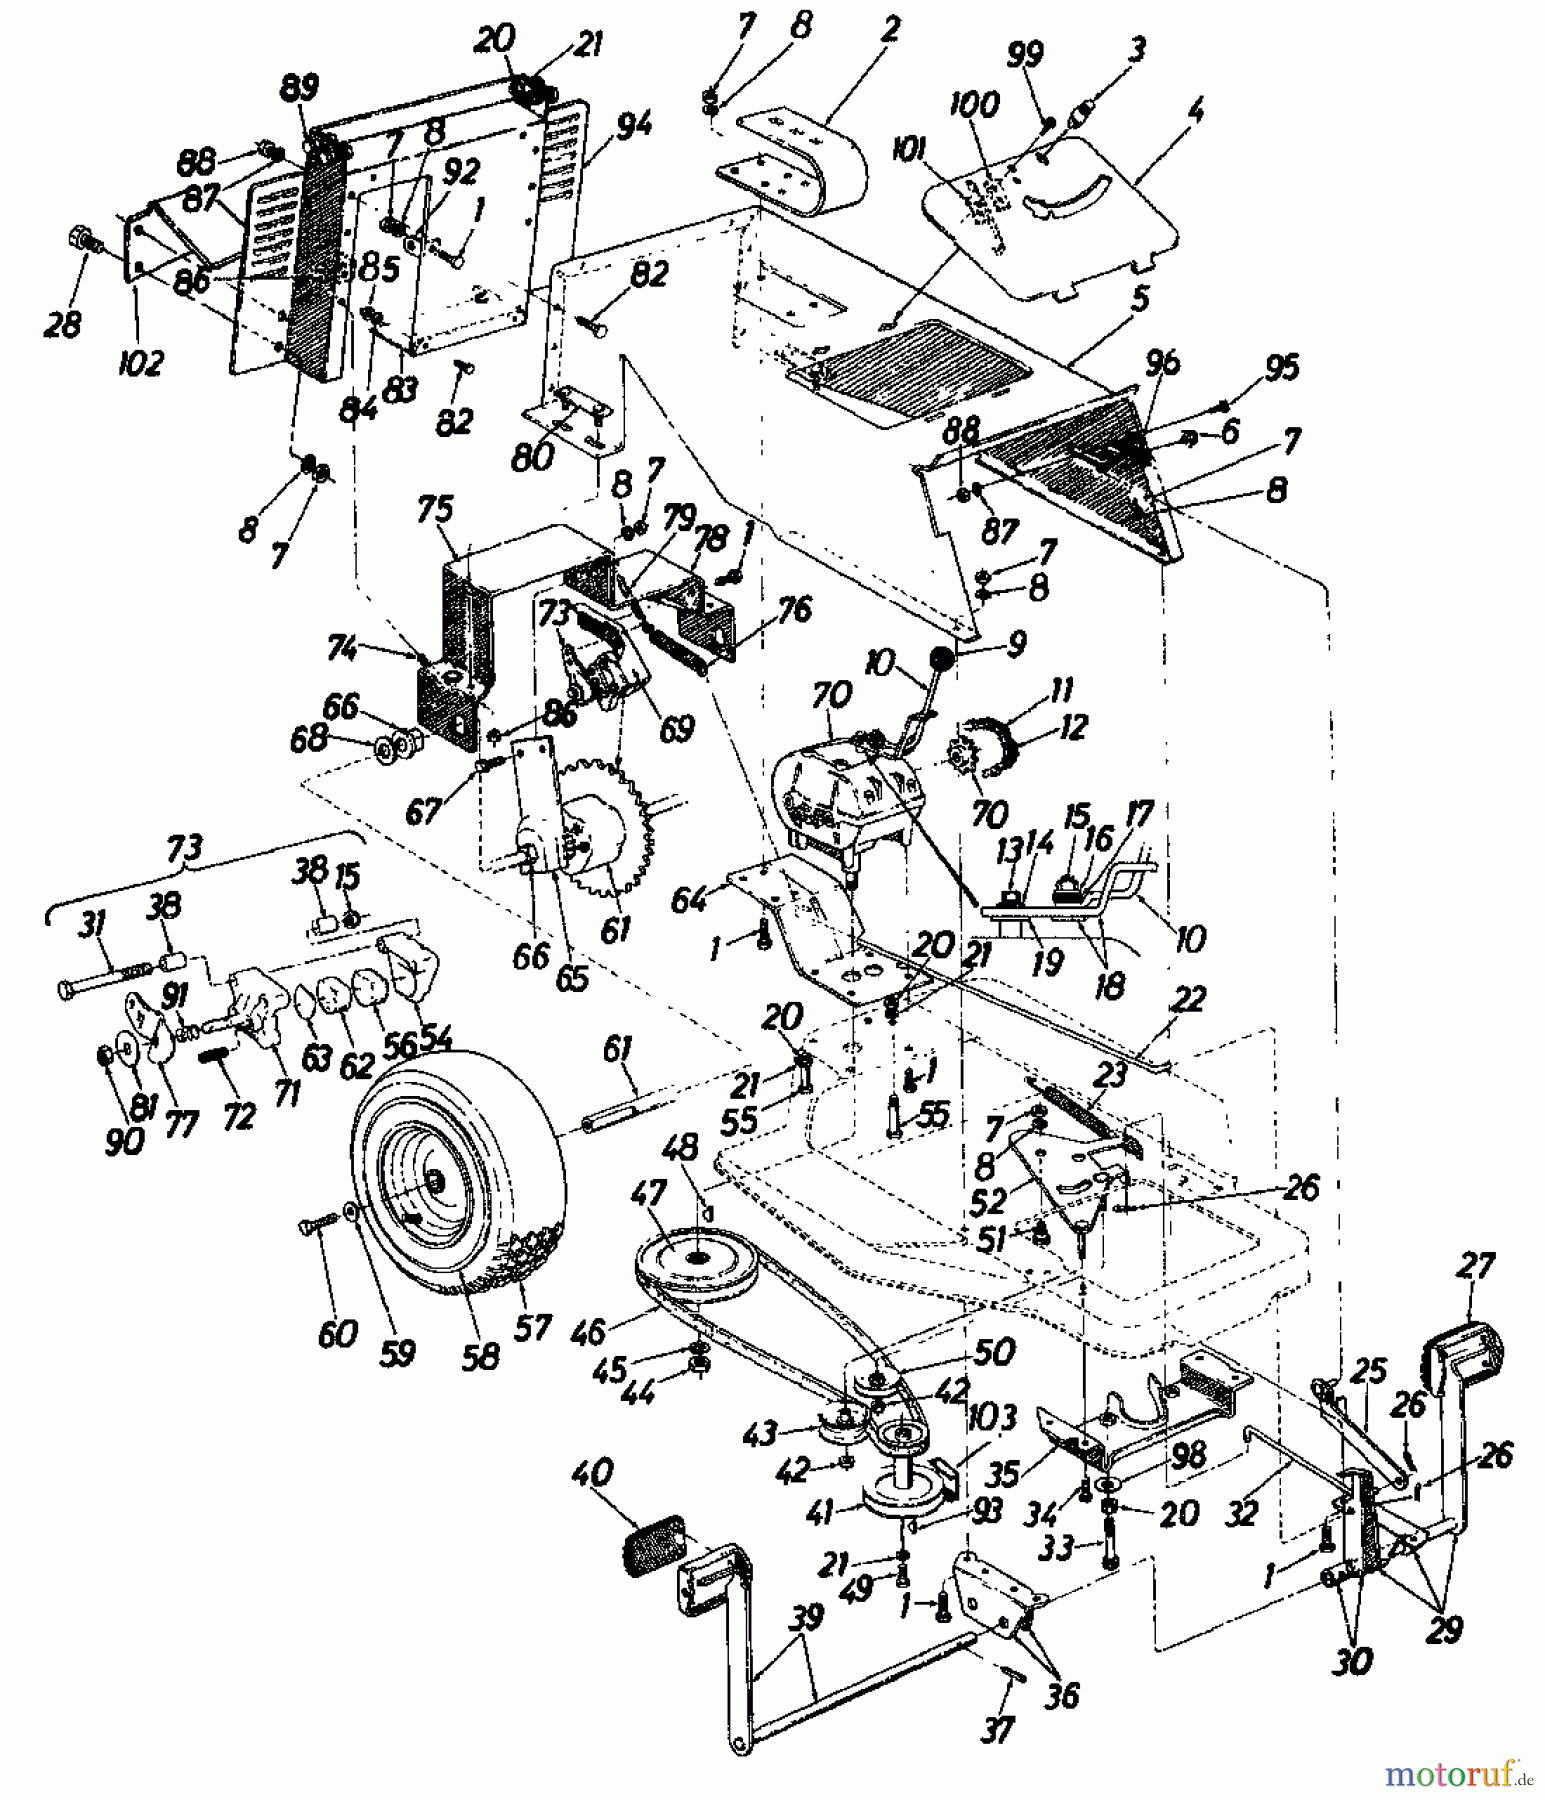  Columbia Lawn tractors RD 10/660 SL 136-5290  (1986) Drive system, Engine pulley, Pedal, Rear wheels